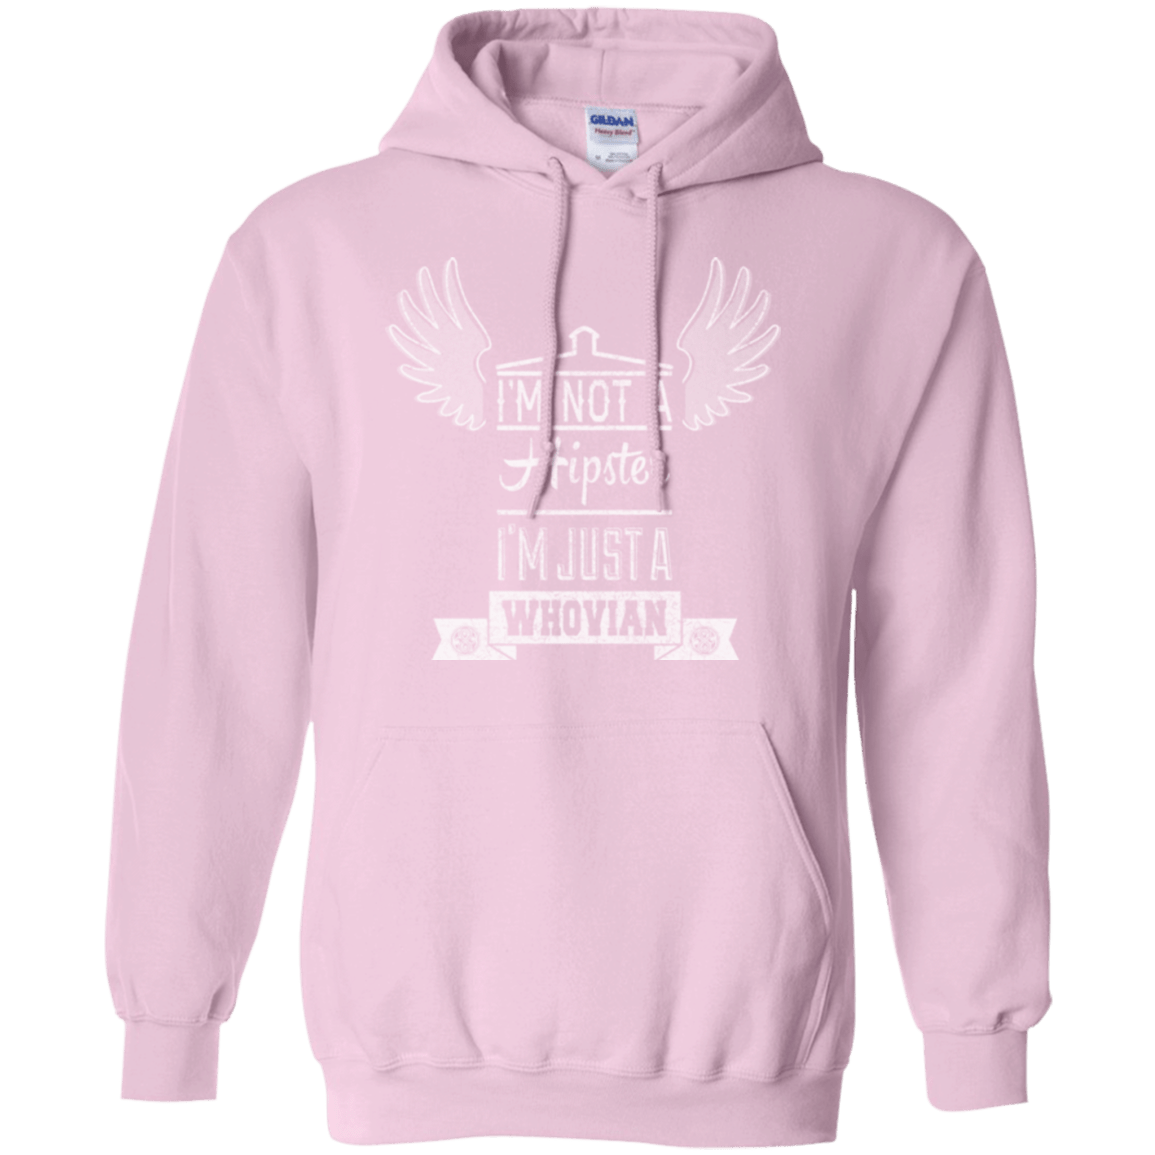 Sweatshirts Light Pink / Small Whovian Hipster Pullover Hoodie